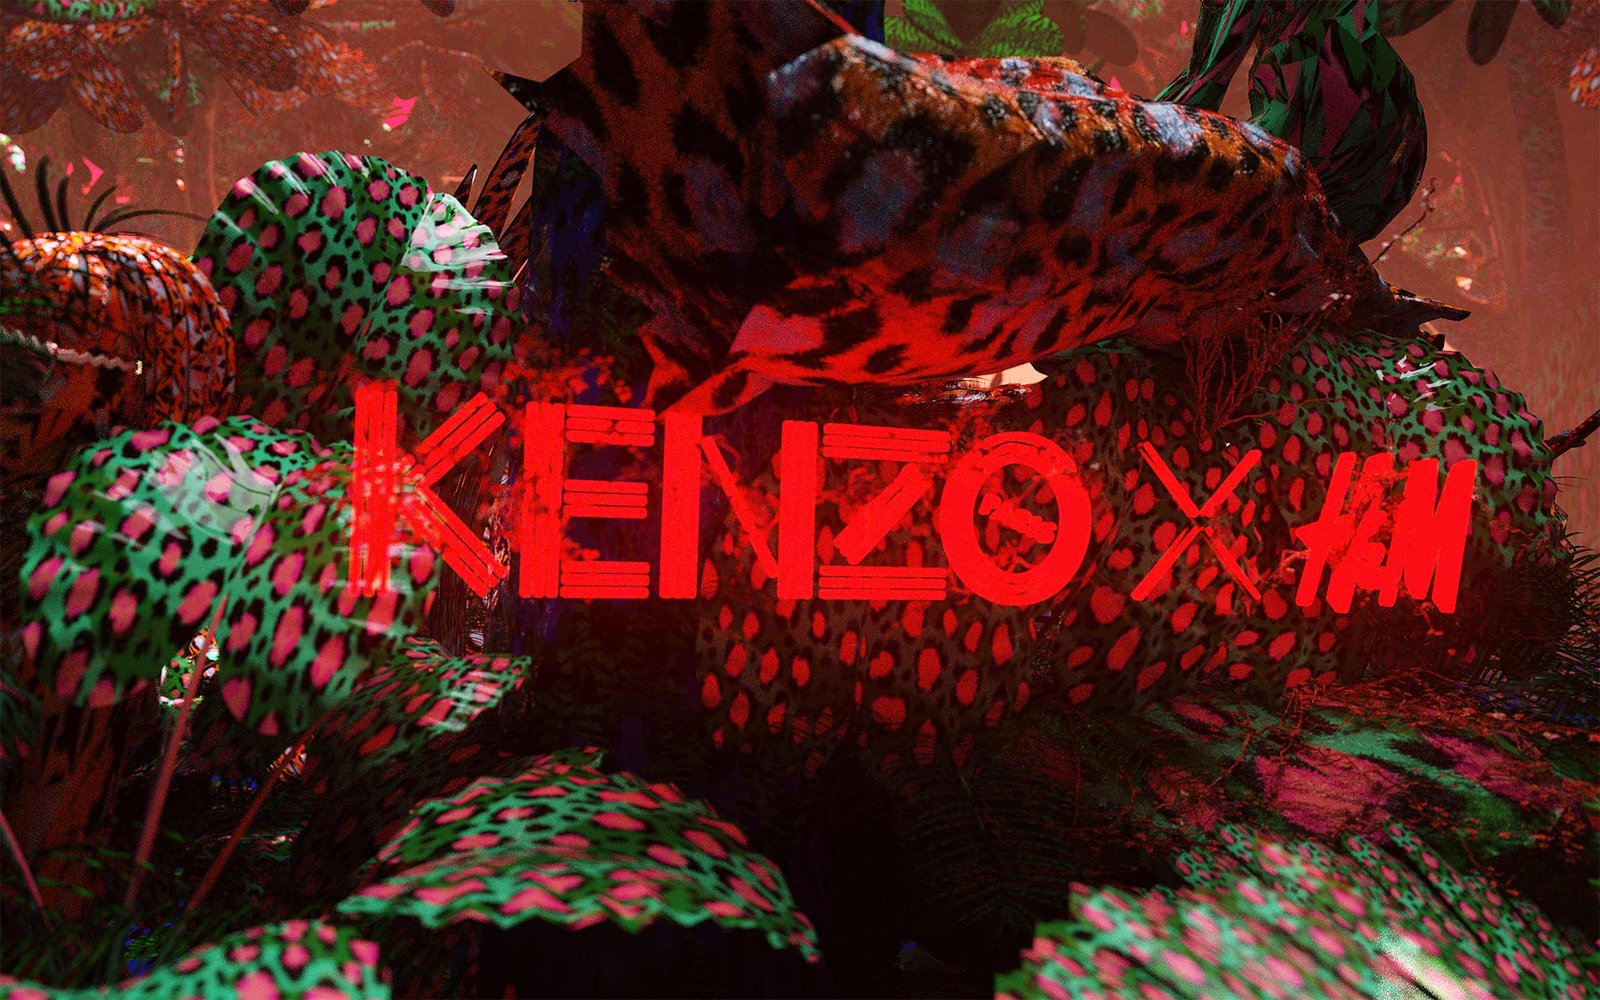 kenzo and h&m collaboration